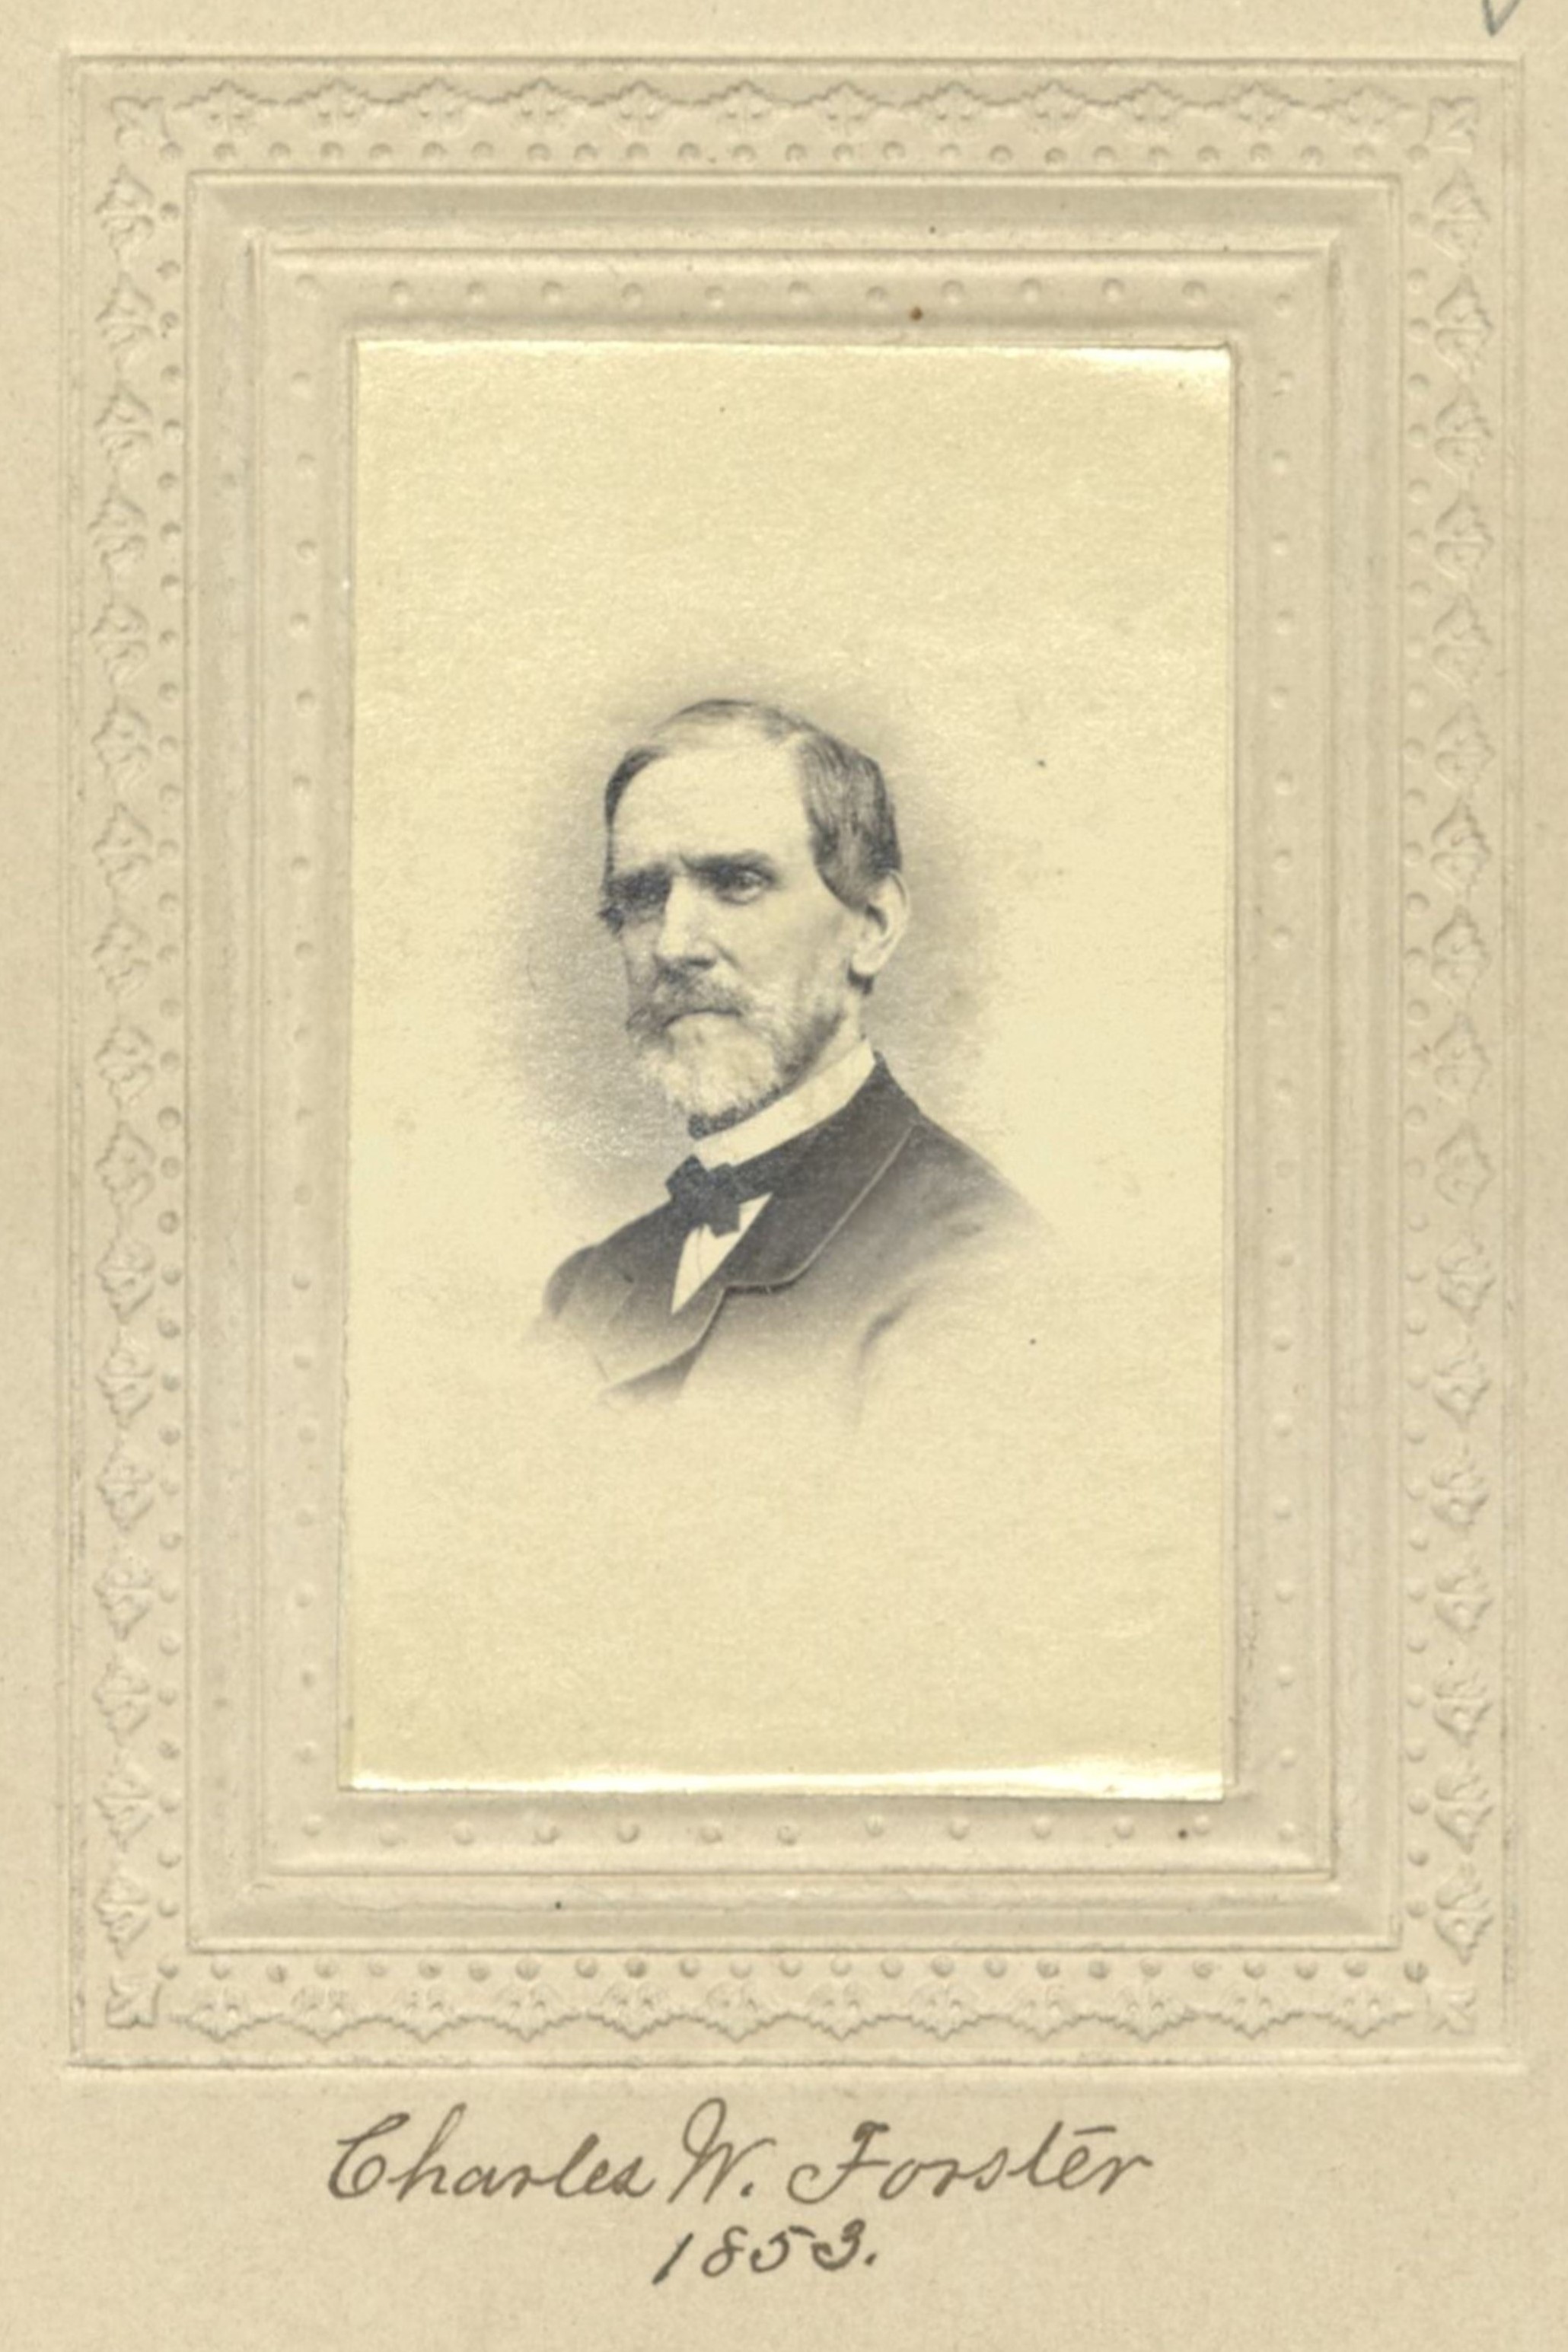 Member portrait of Charles W. Foster